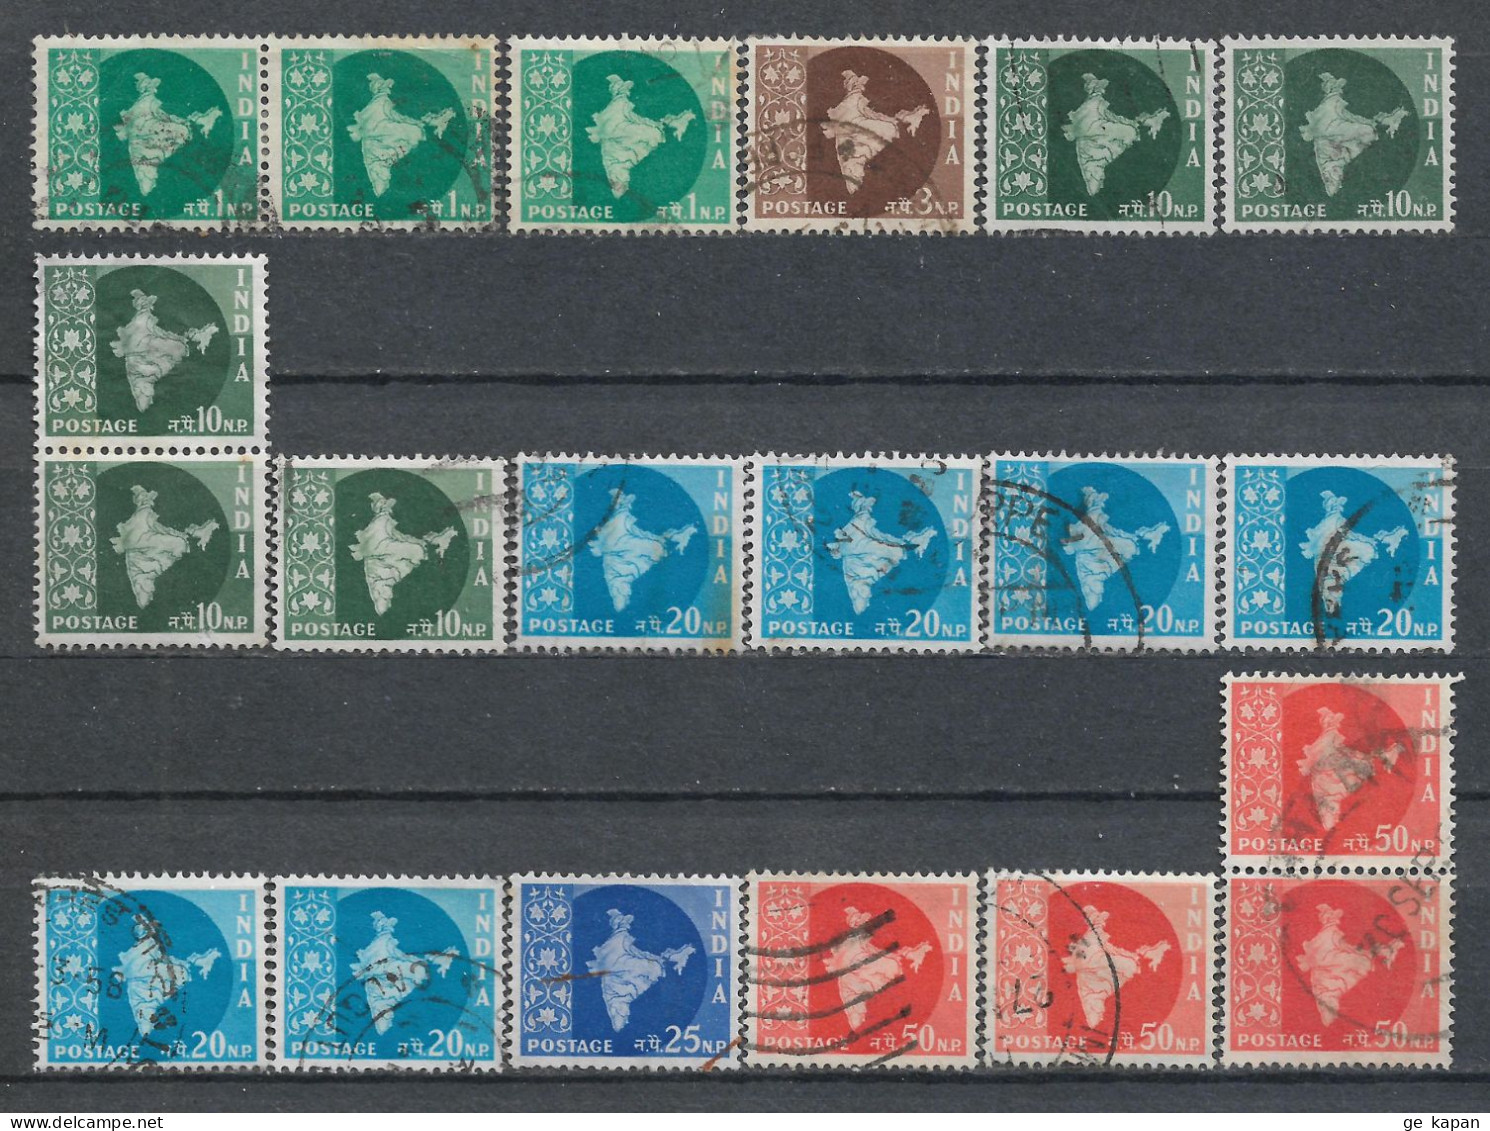 1957 INDIA SET OF 20 USED STAMPS (Michel # 259,261,265,268-270) CV €4.00 - Used Stamps